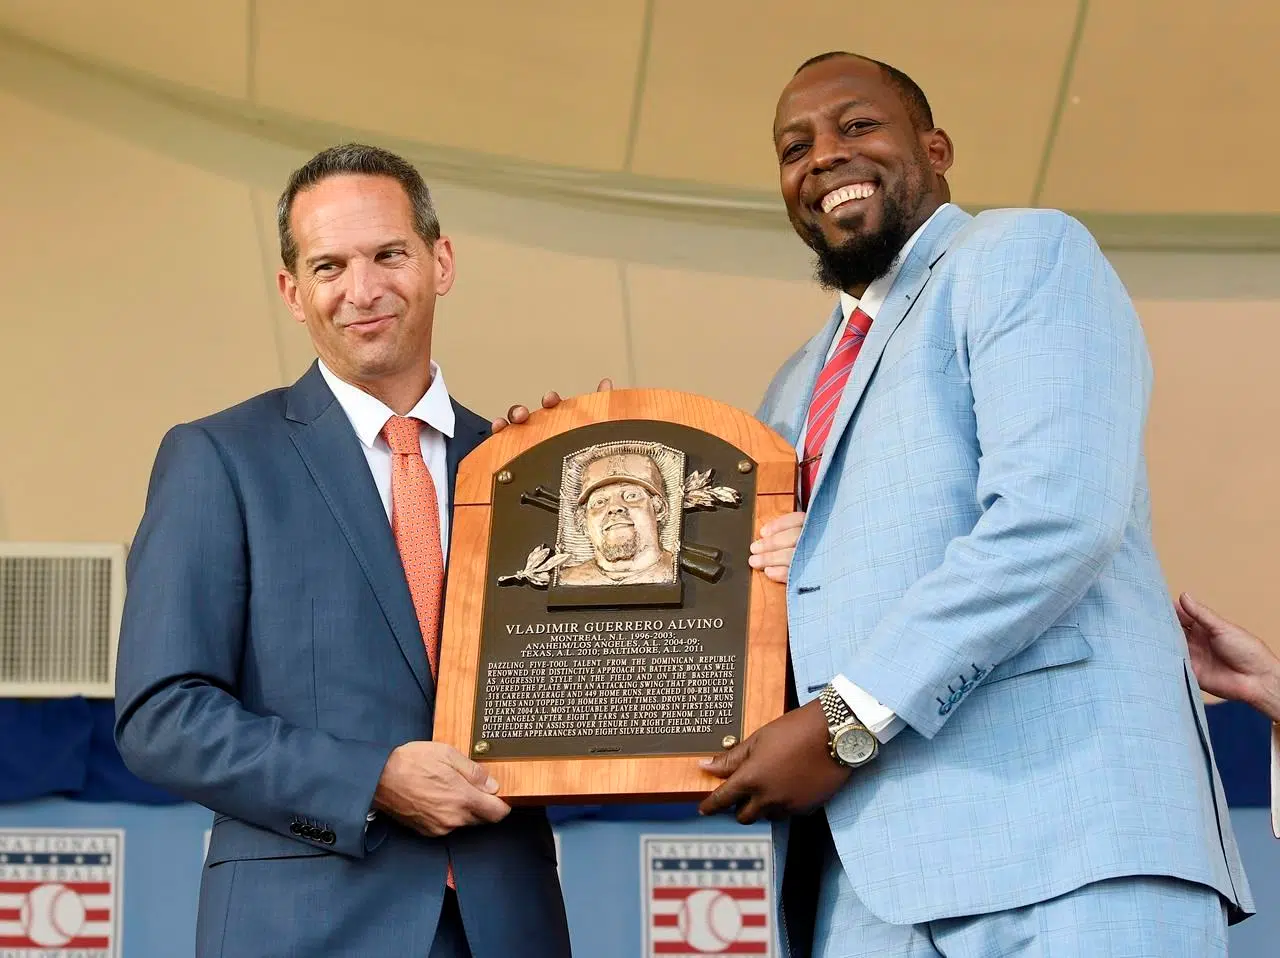 Vladimir Guerrero officially inducted into the Baseball Hall of Fame